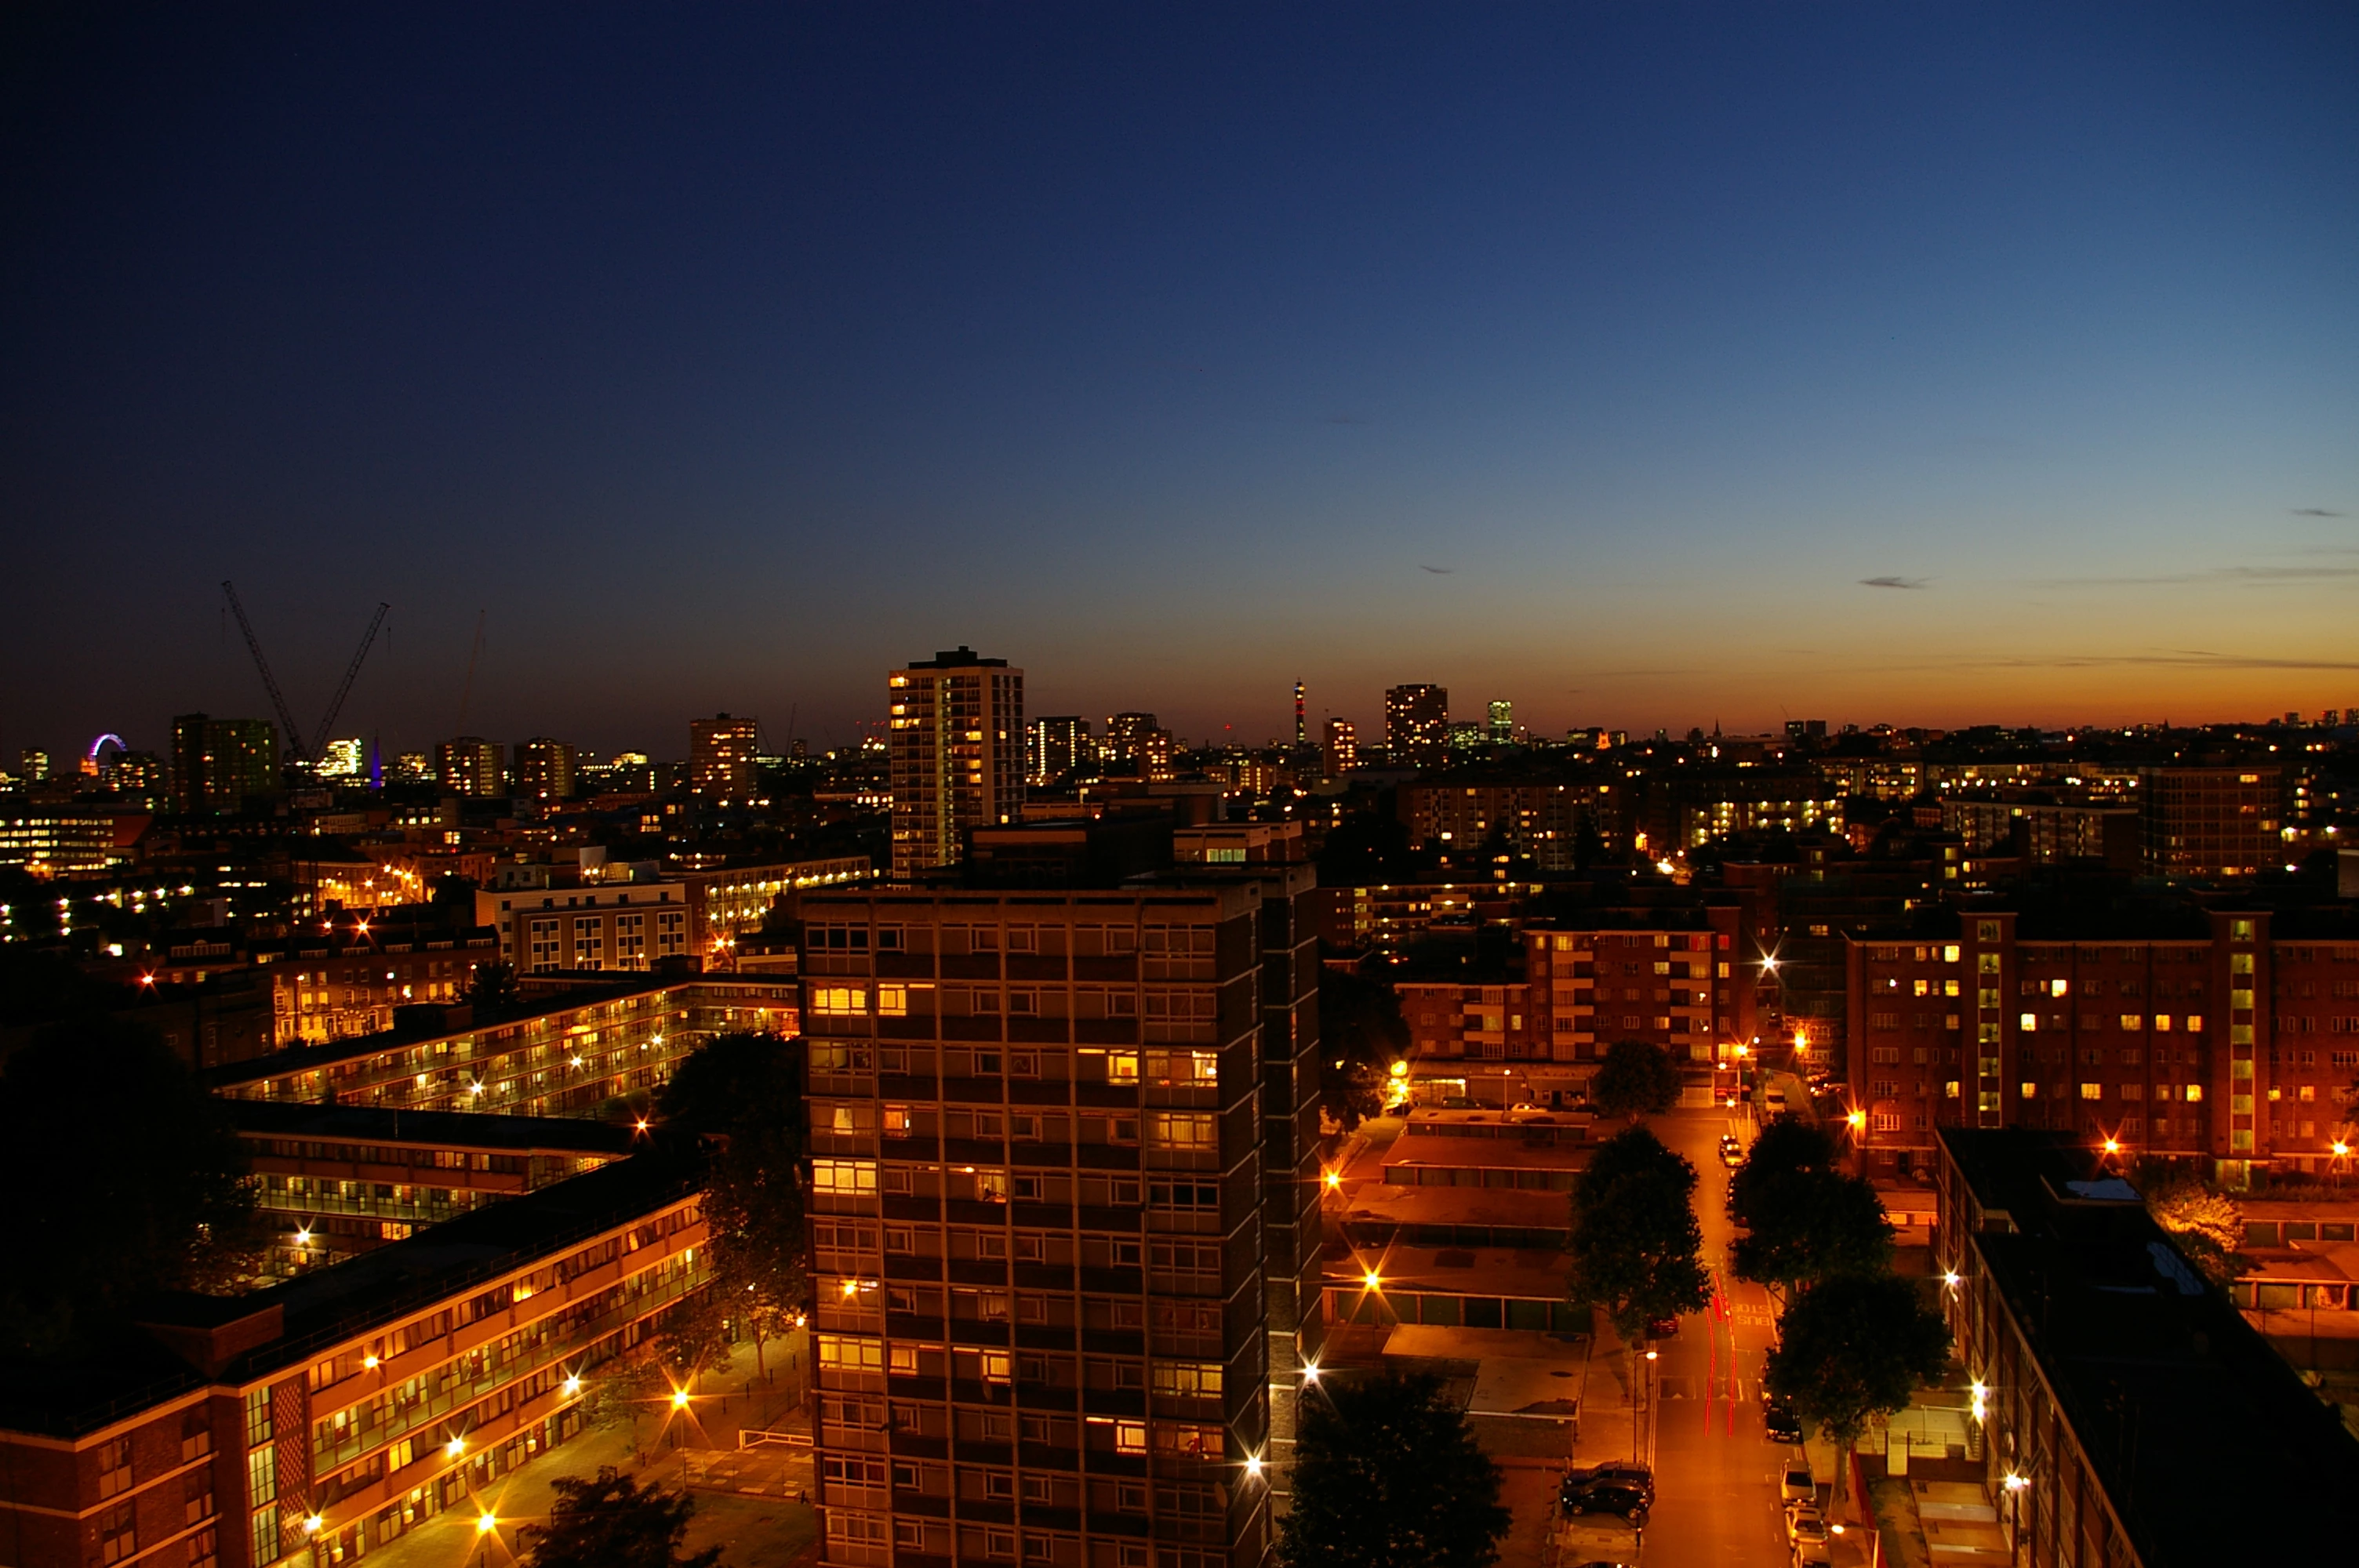 Hoxton and the rest of London at Night